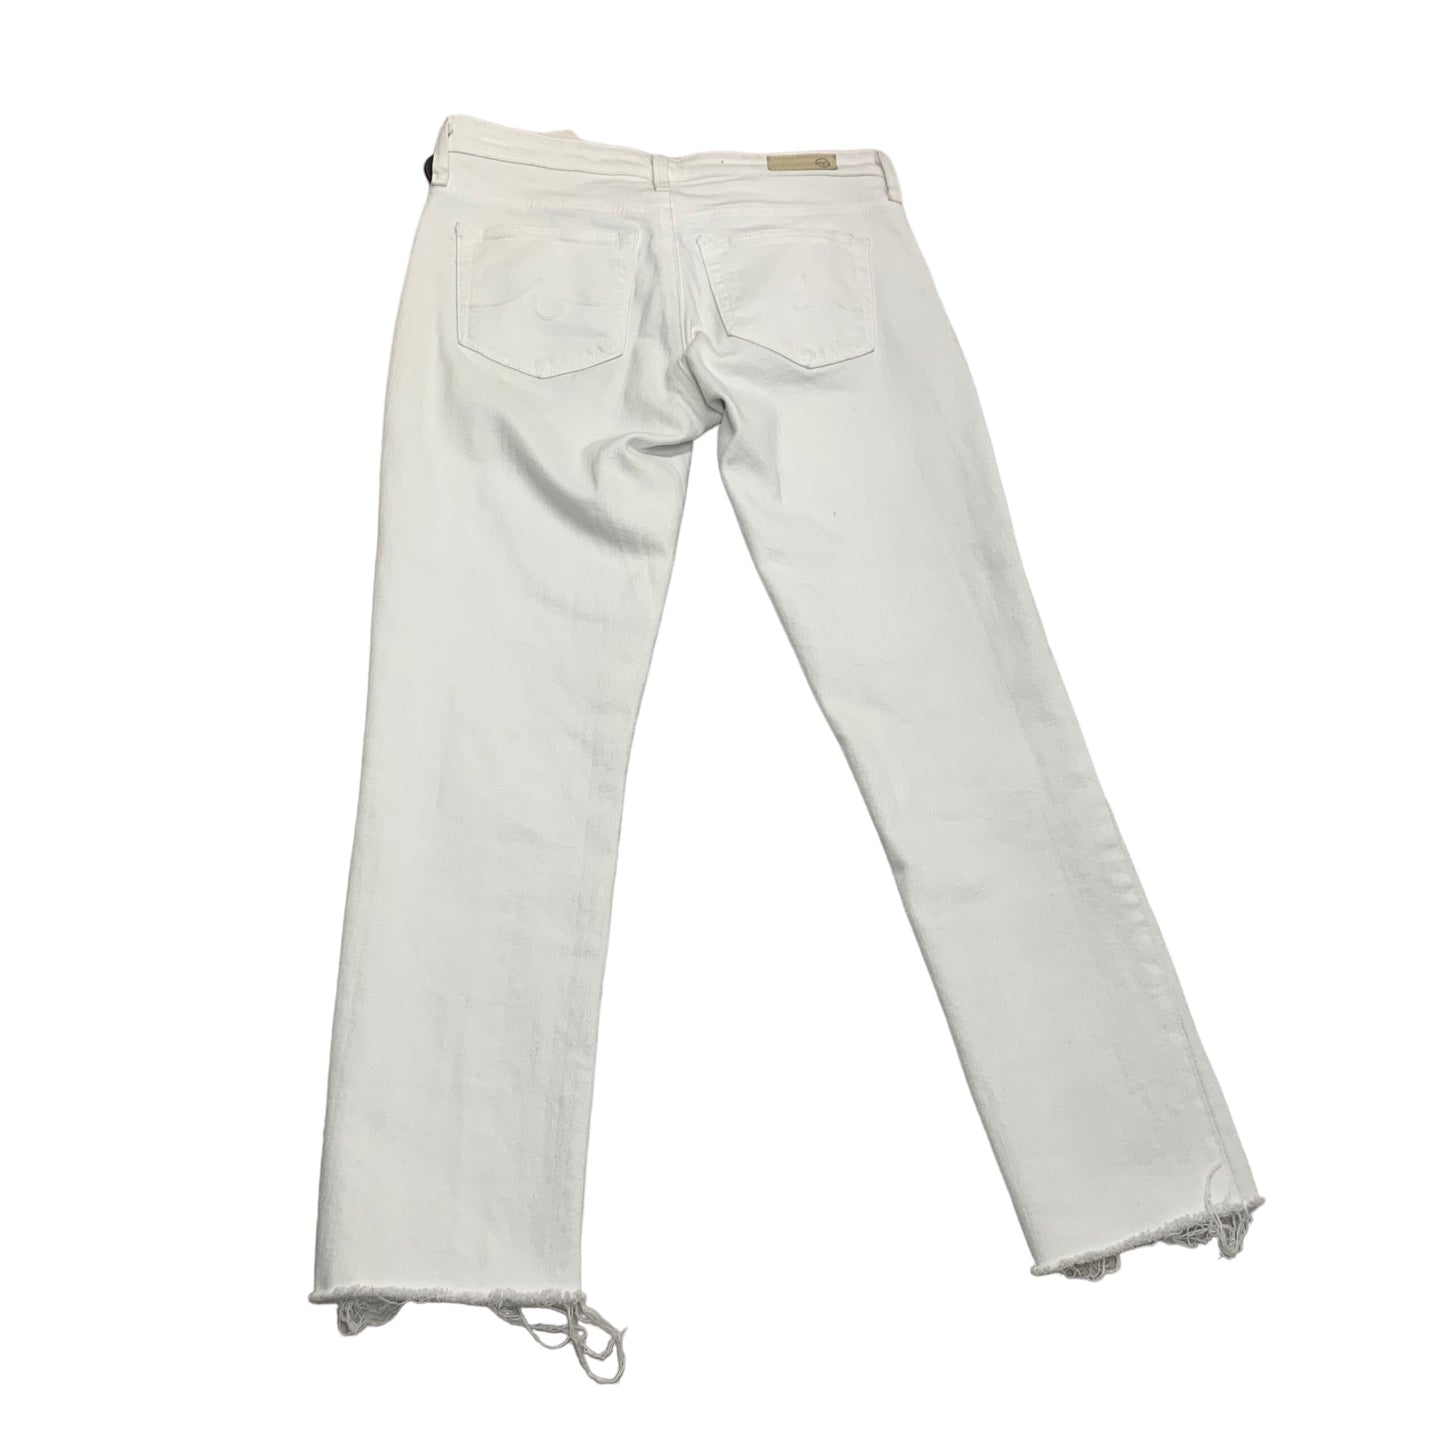 Pants Designer By Adriano Goldschmied  Size: 2